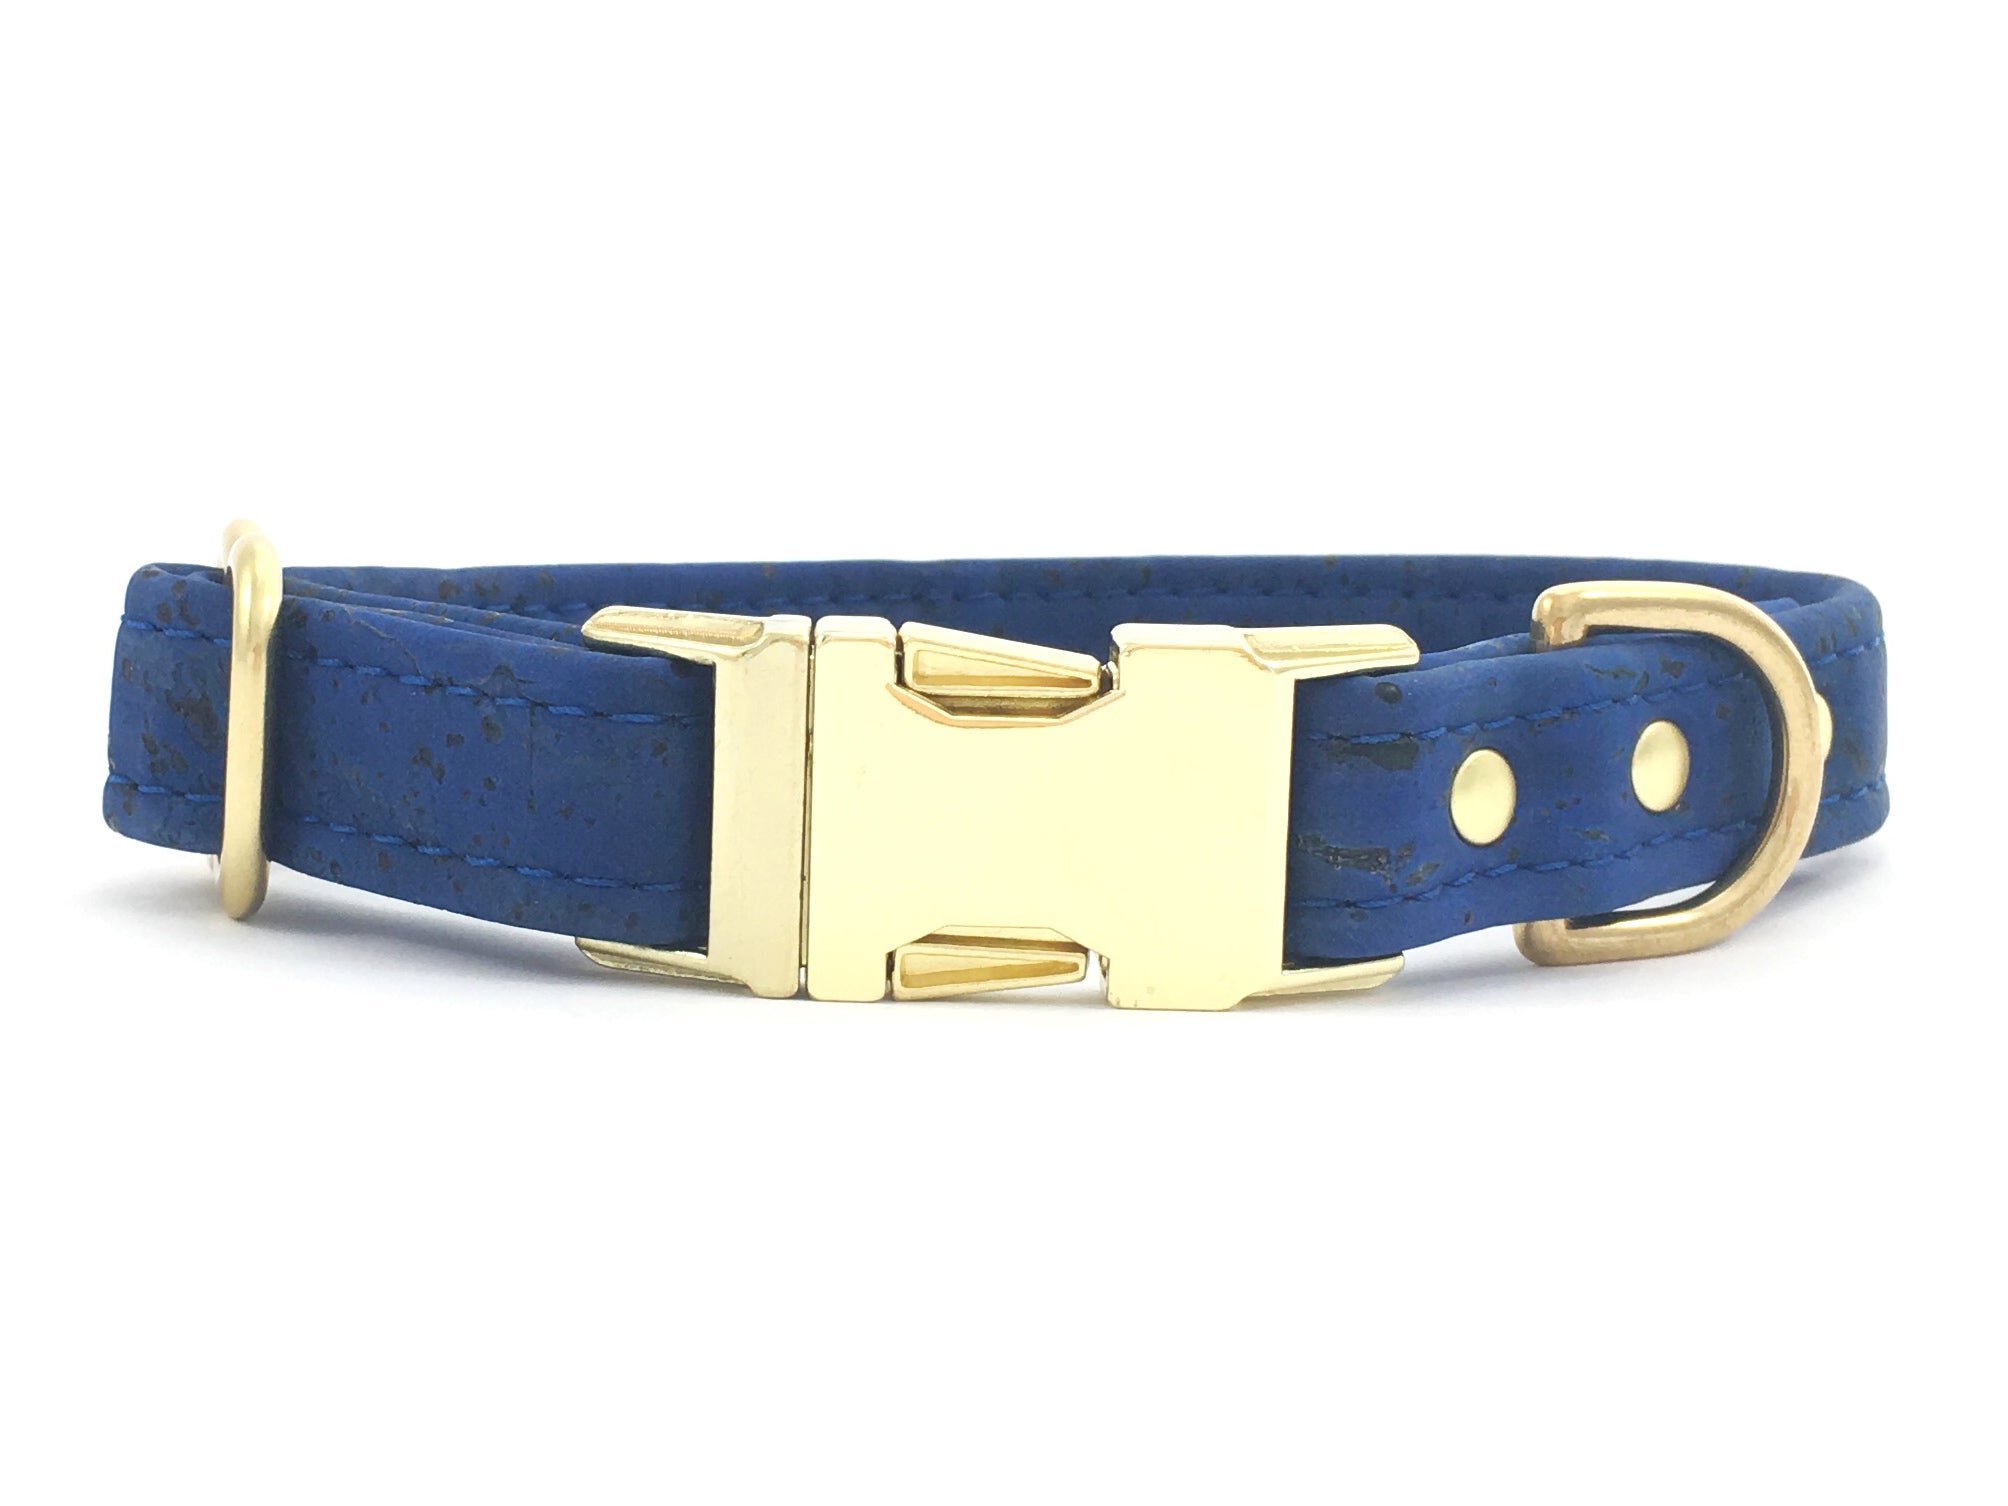 Blue dog collar in vegan cork leather with brass buckle and hardware, made in the UK